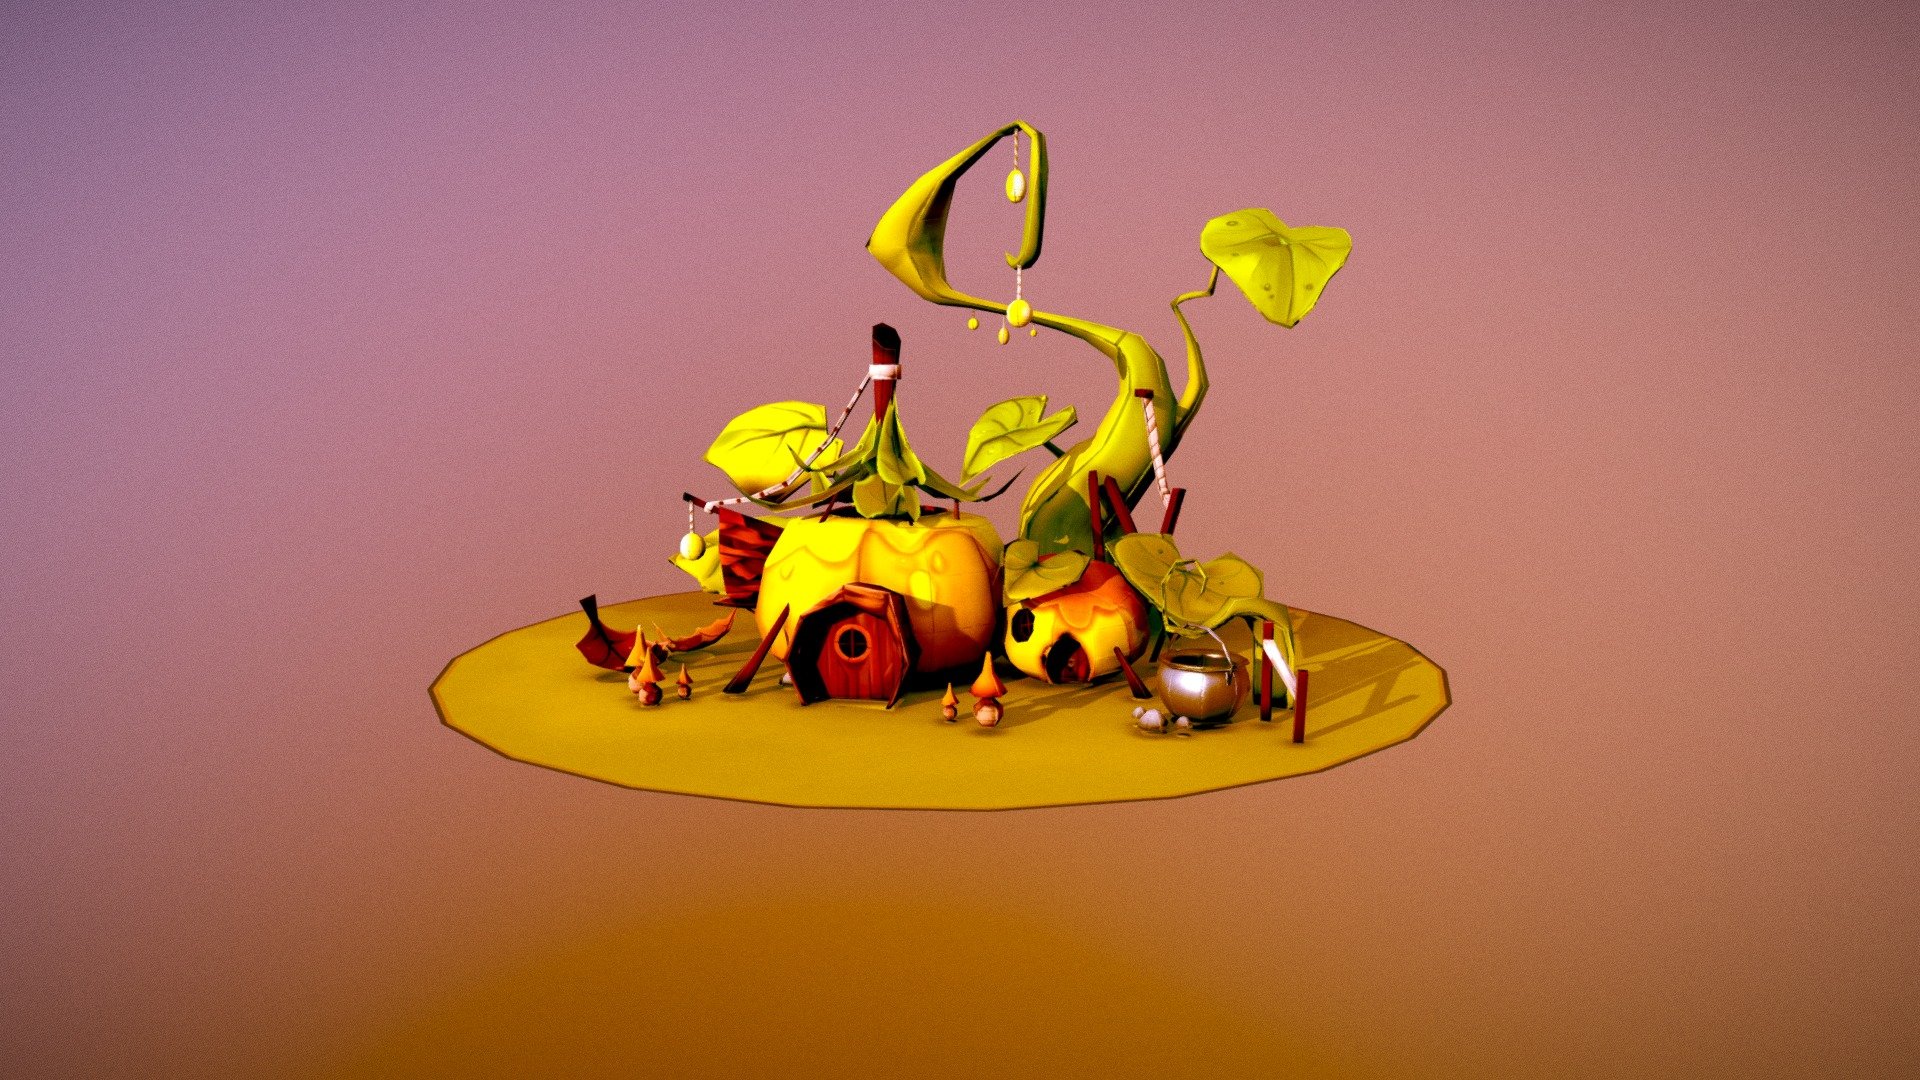 Low poly Recreation of the concept art of the “Autumn House” by Ettiene Savoie for a school project 3d model